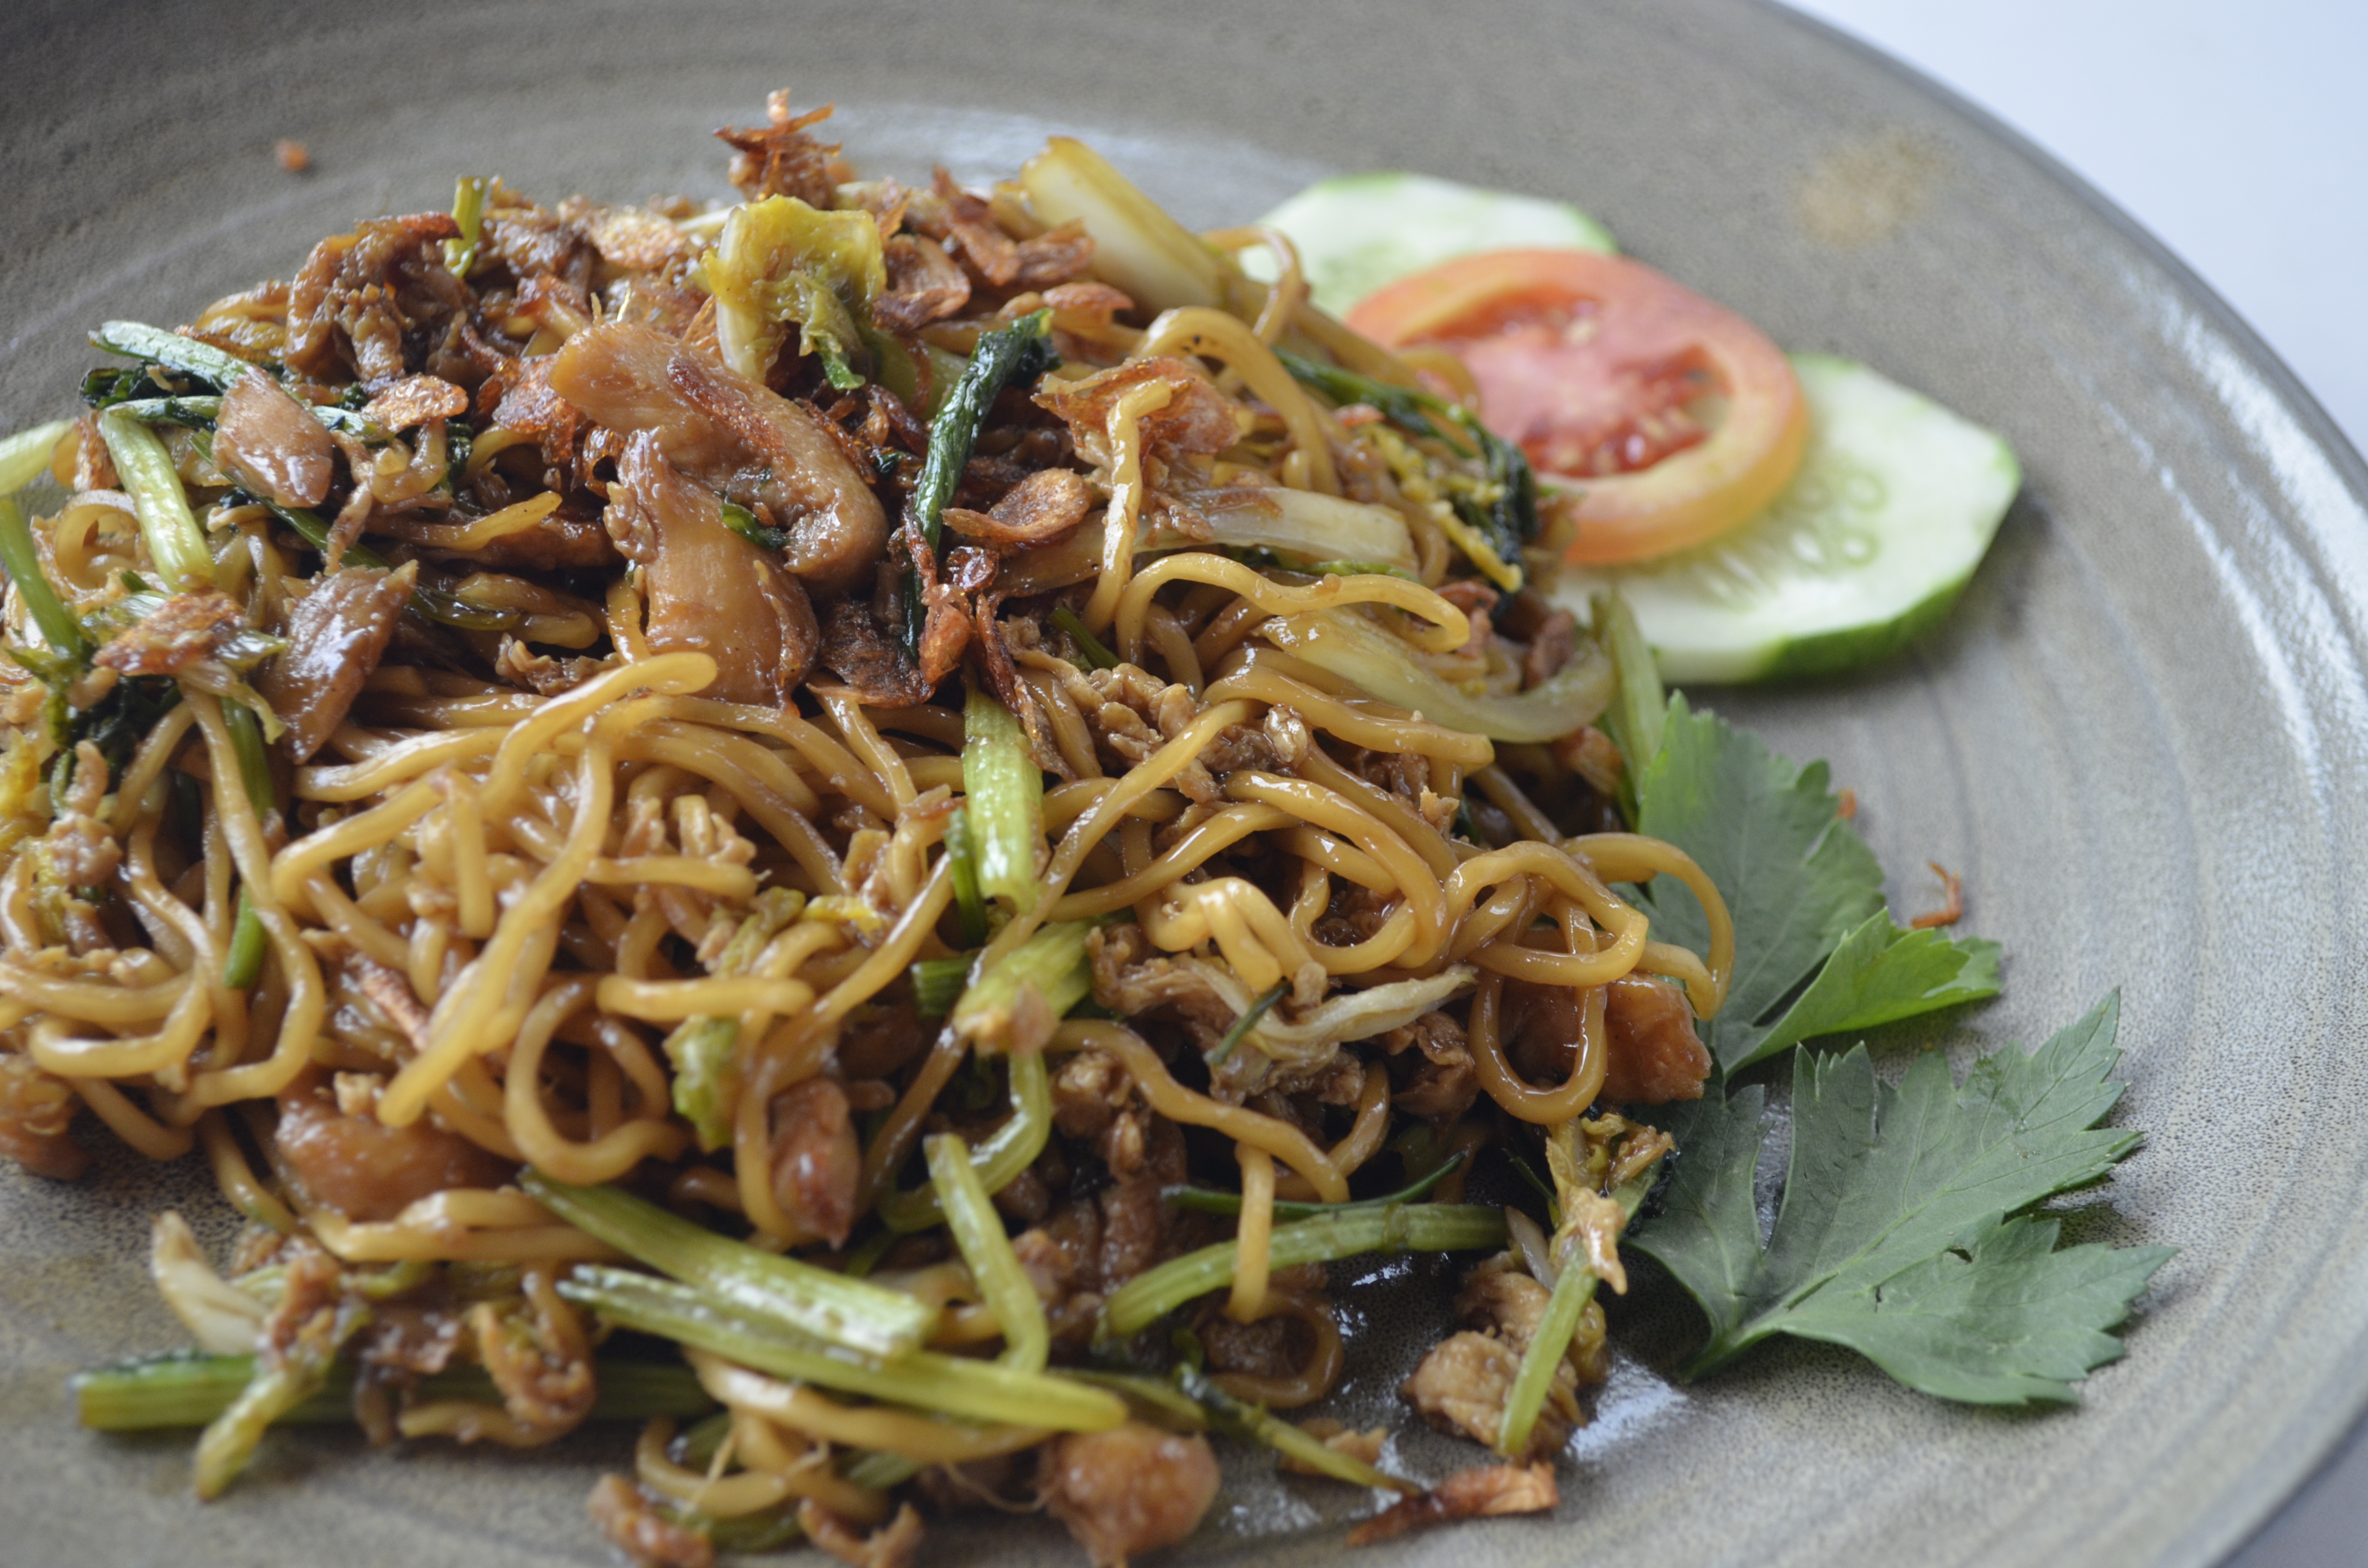 MIE GORENG SPECIAL